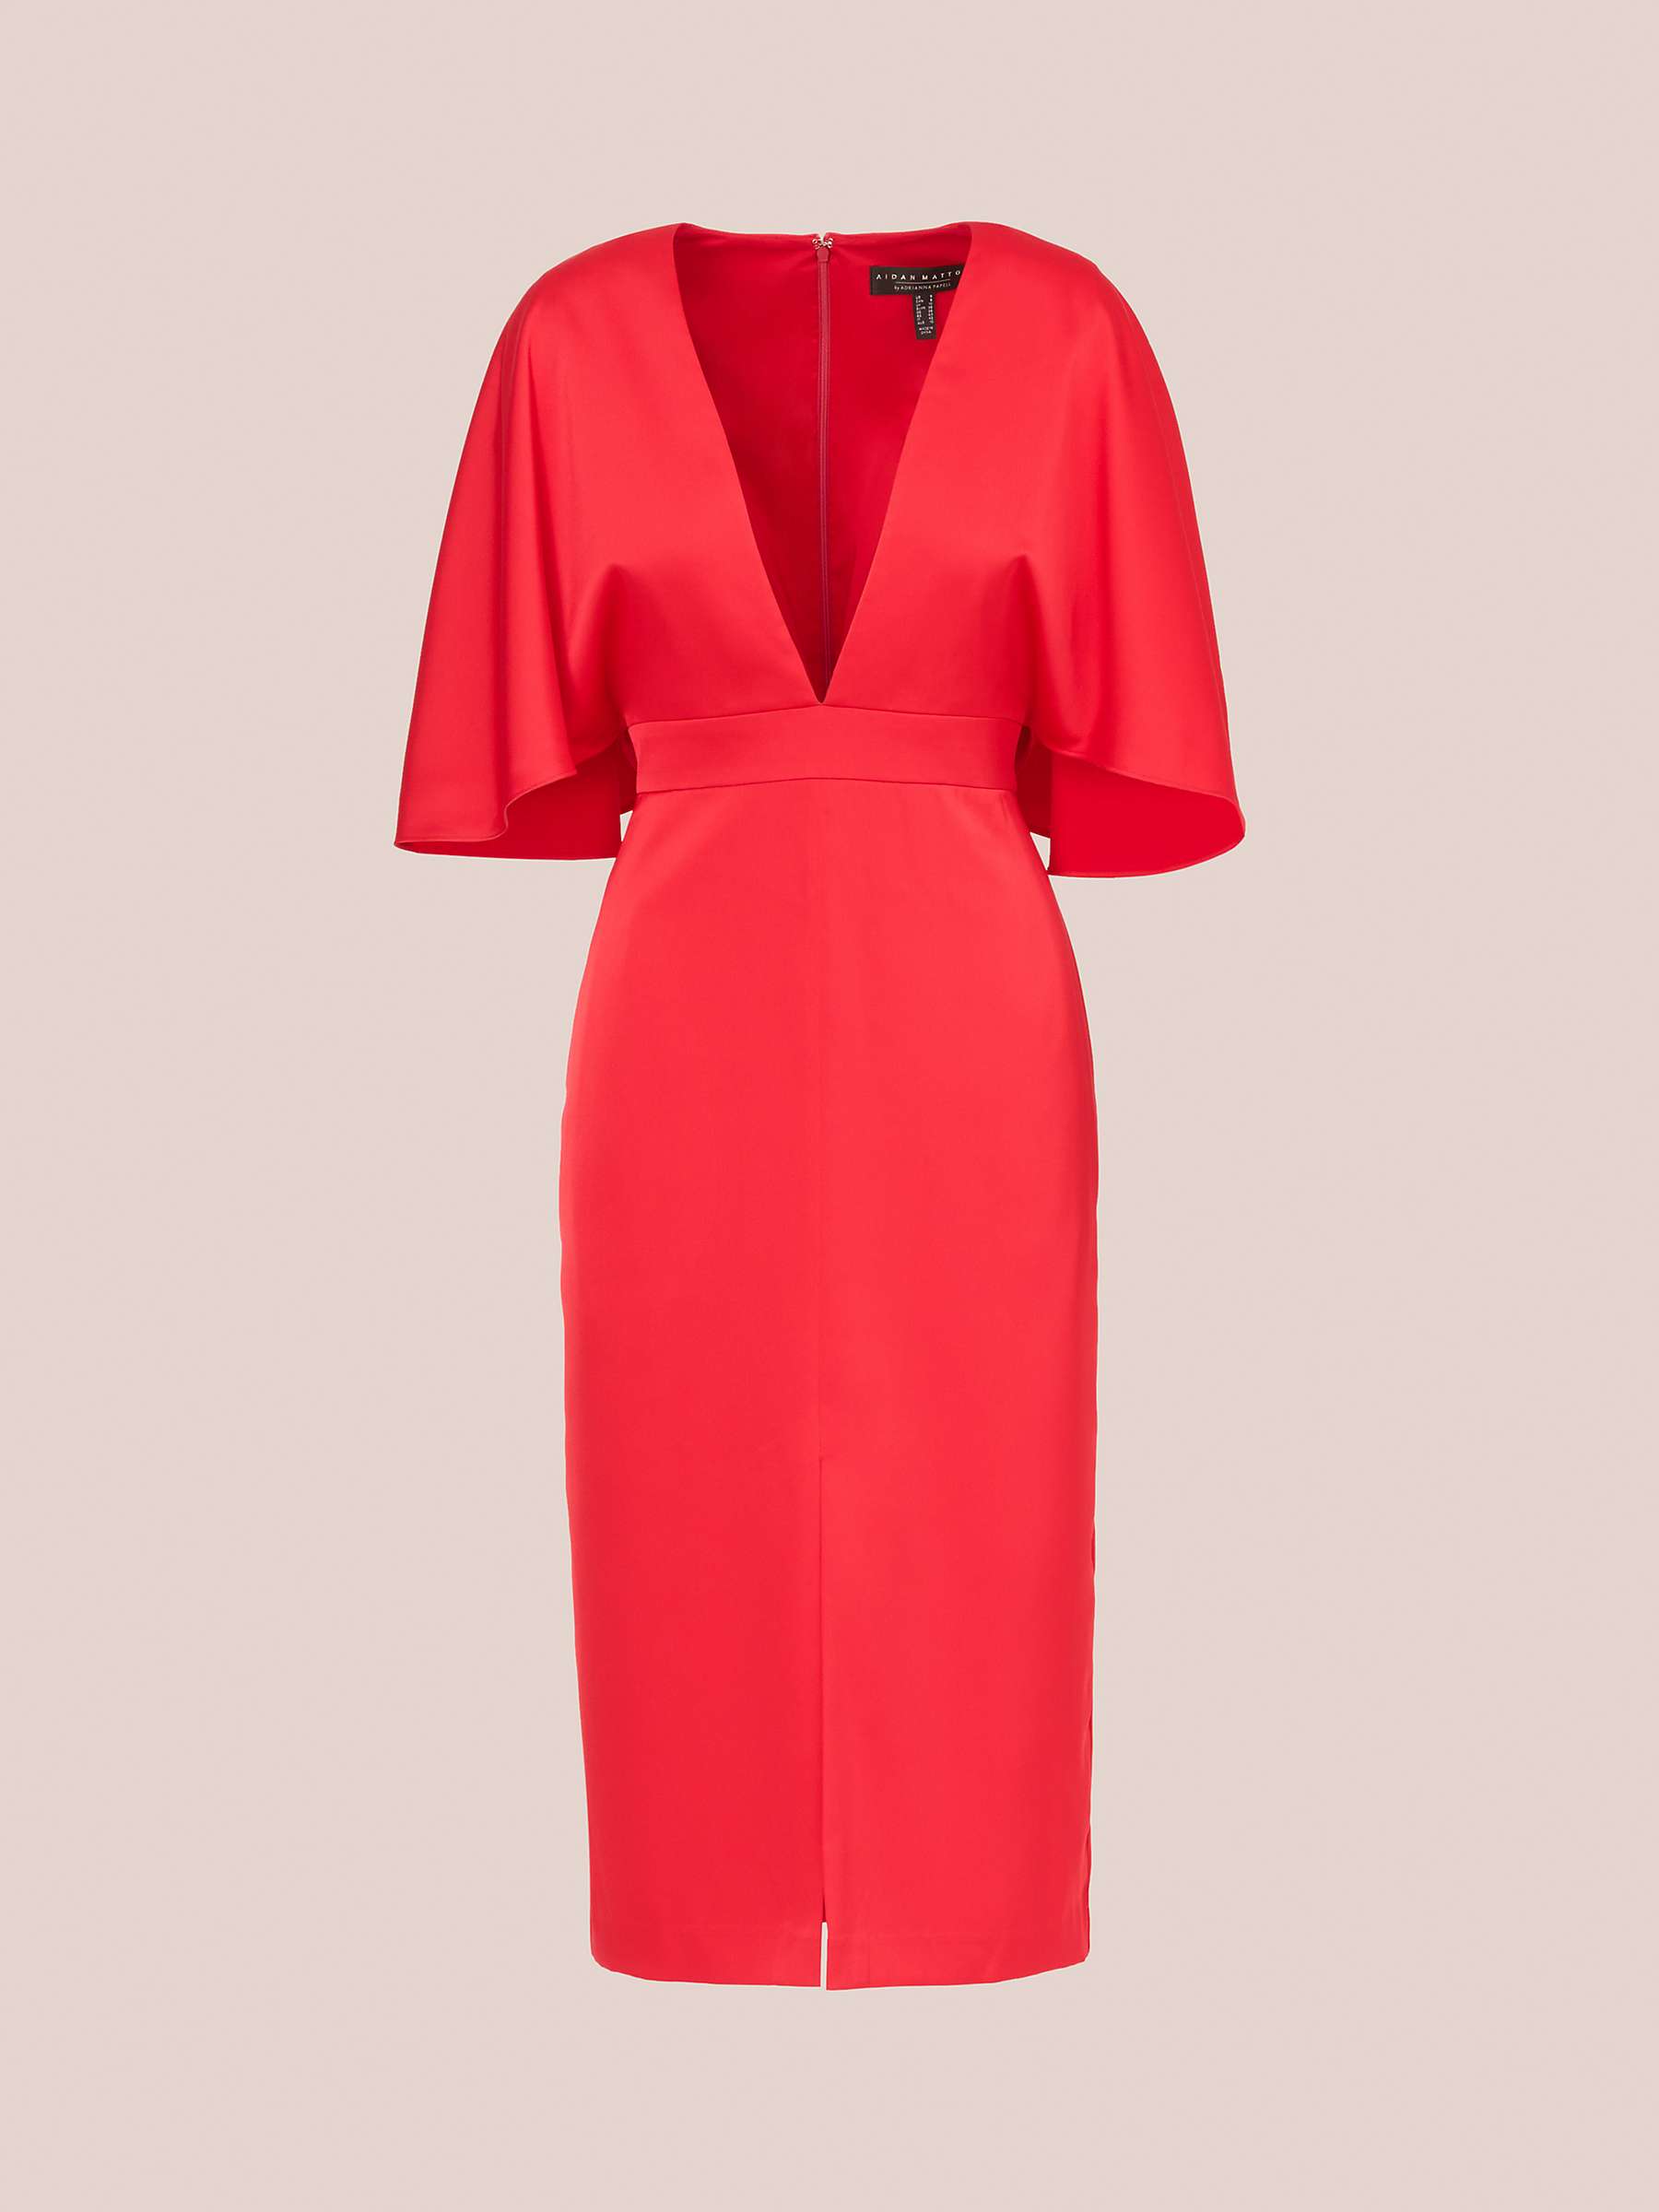 Buy Aidan Mattox by Adrianna Papell Midi Crepe Back Satin Dress, Chateau Red Online at johnlewis.com